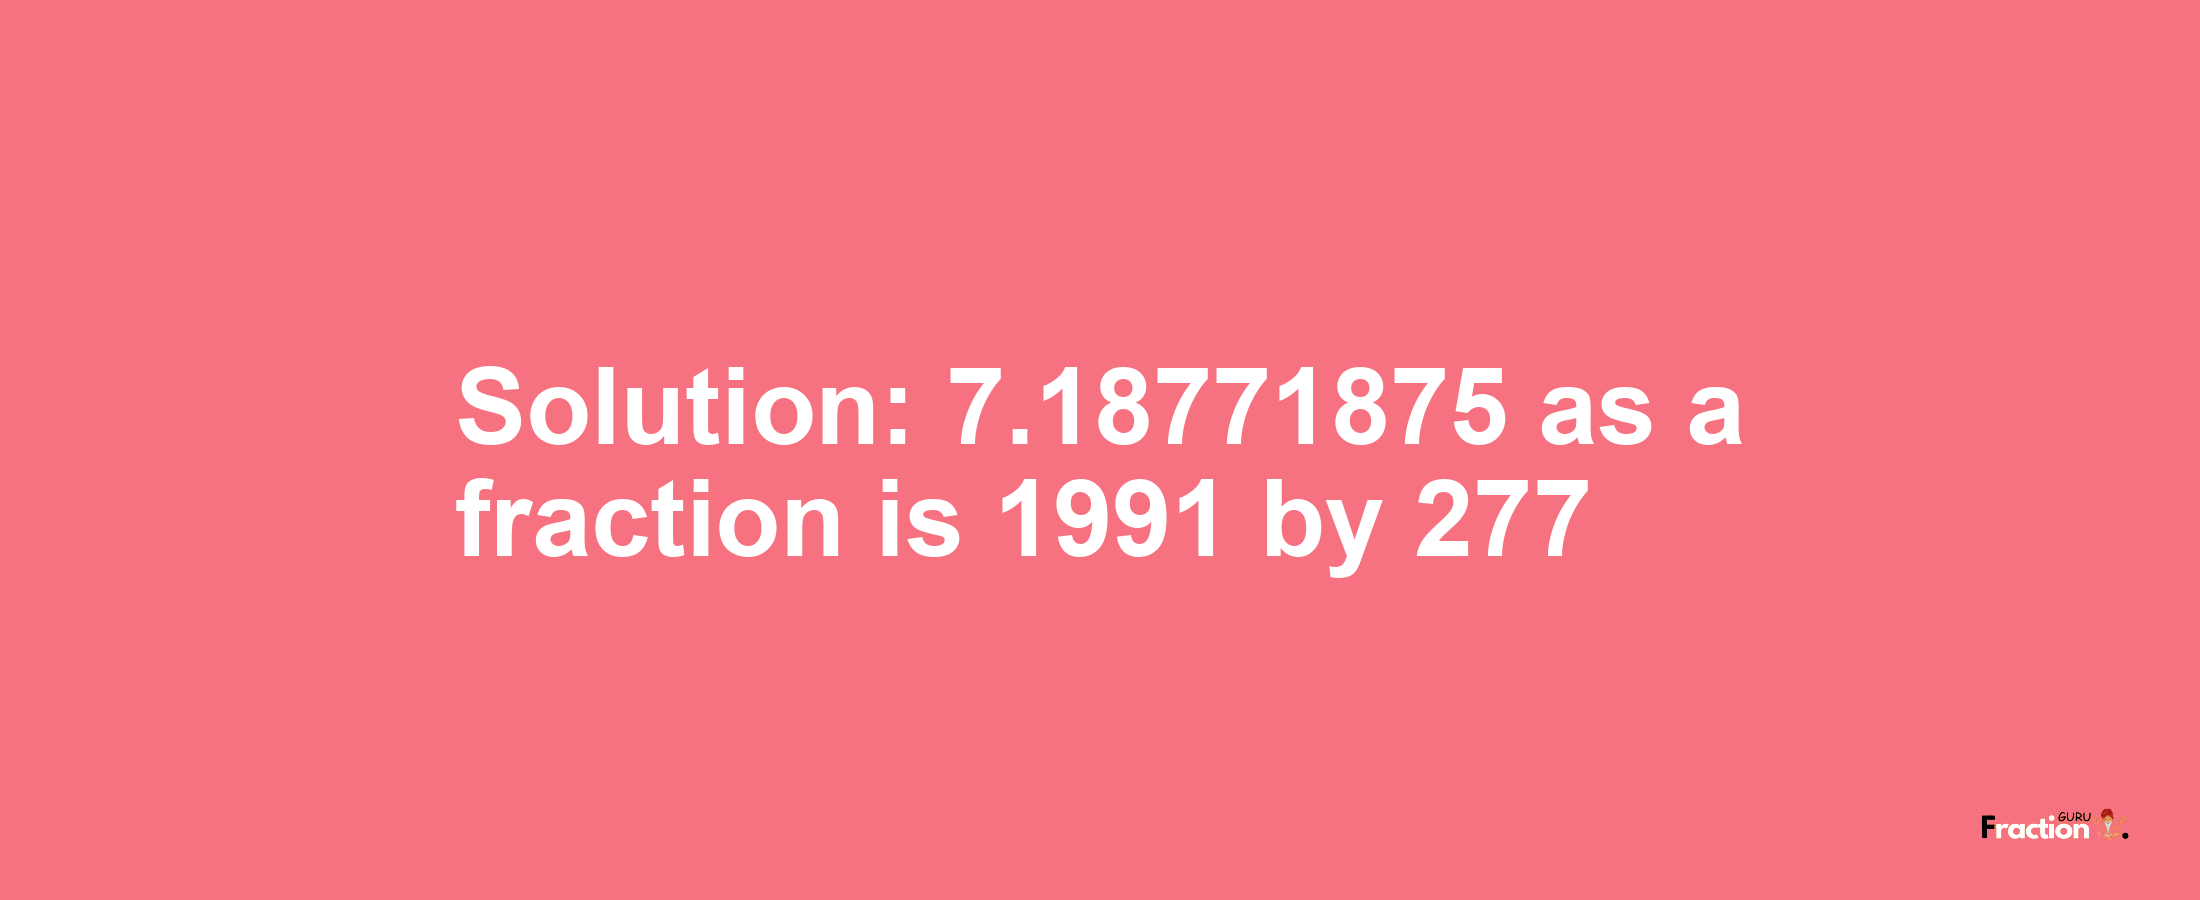 Solution:7.18771875 as a fraction is 1991/277